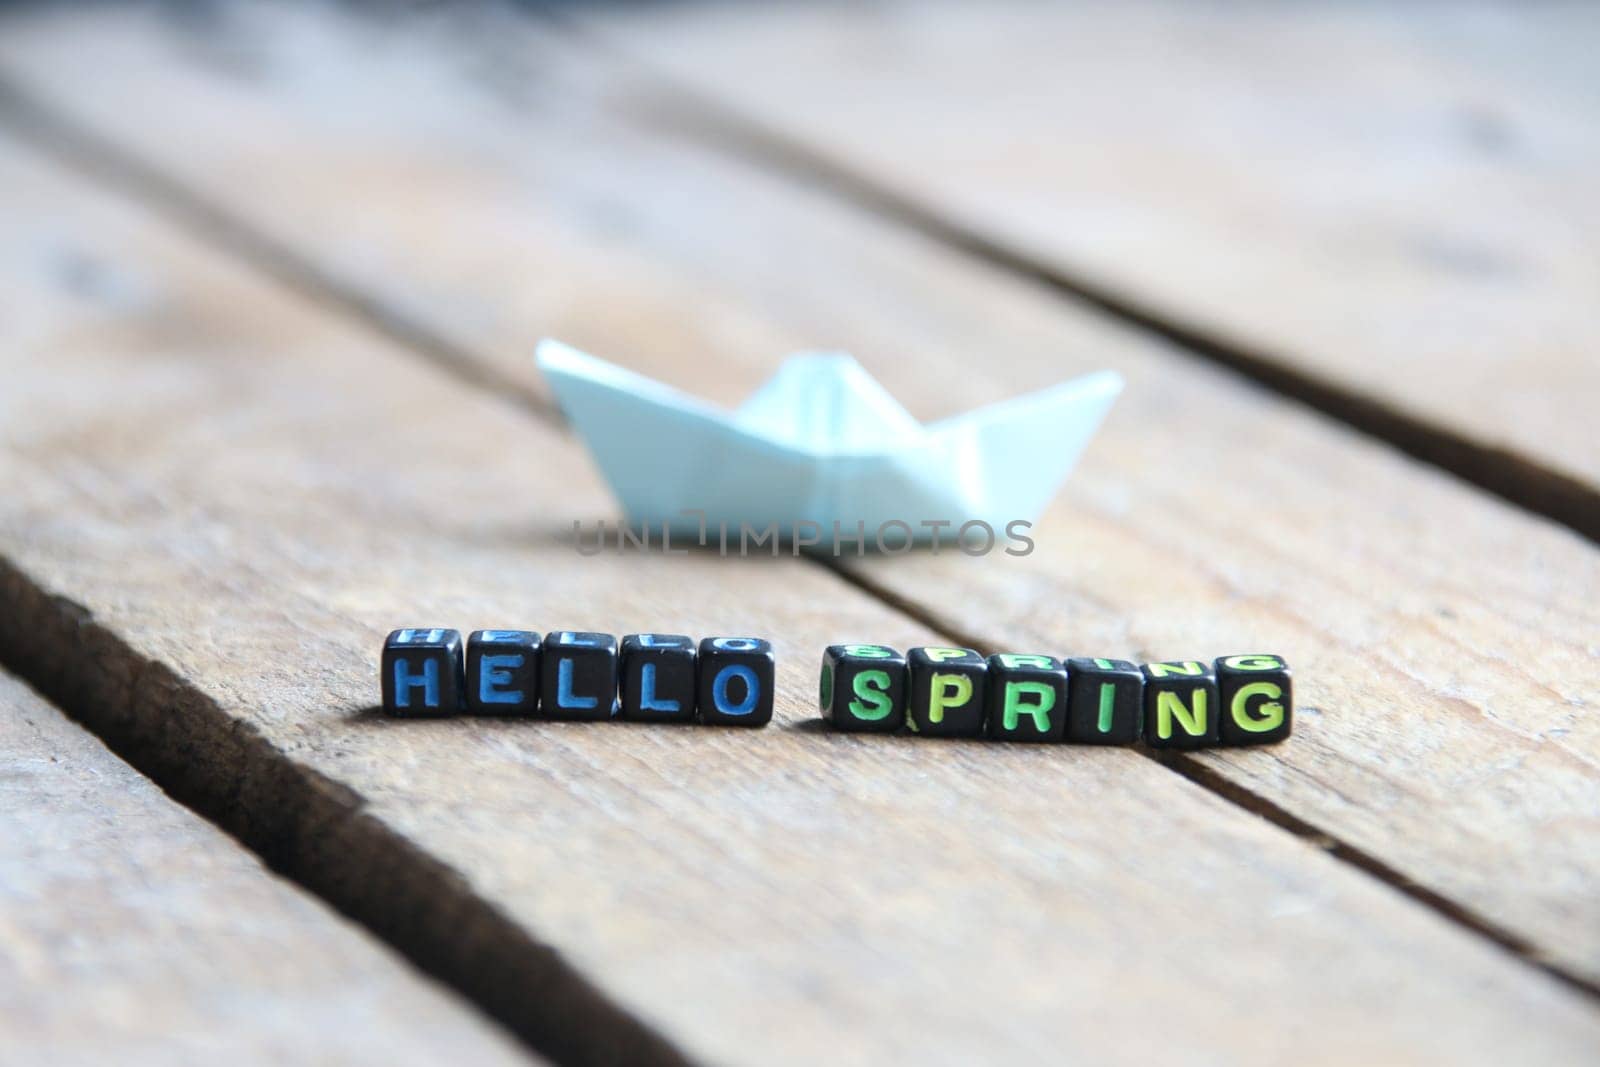 Hello Spring. Motivation and inspiration message concept.